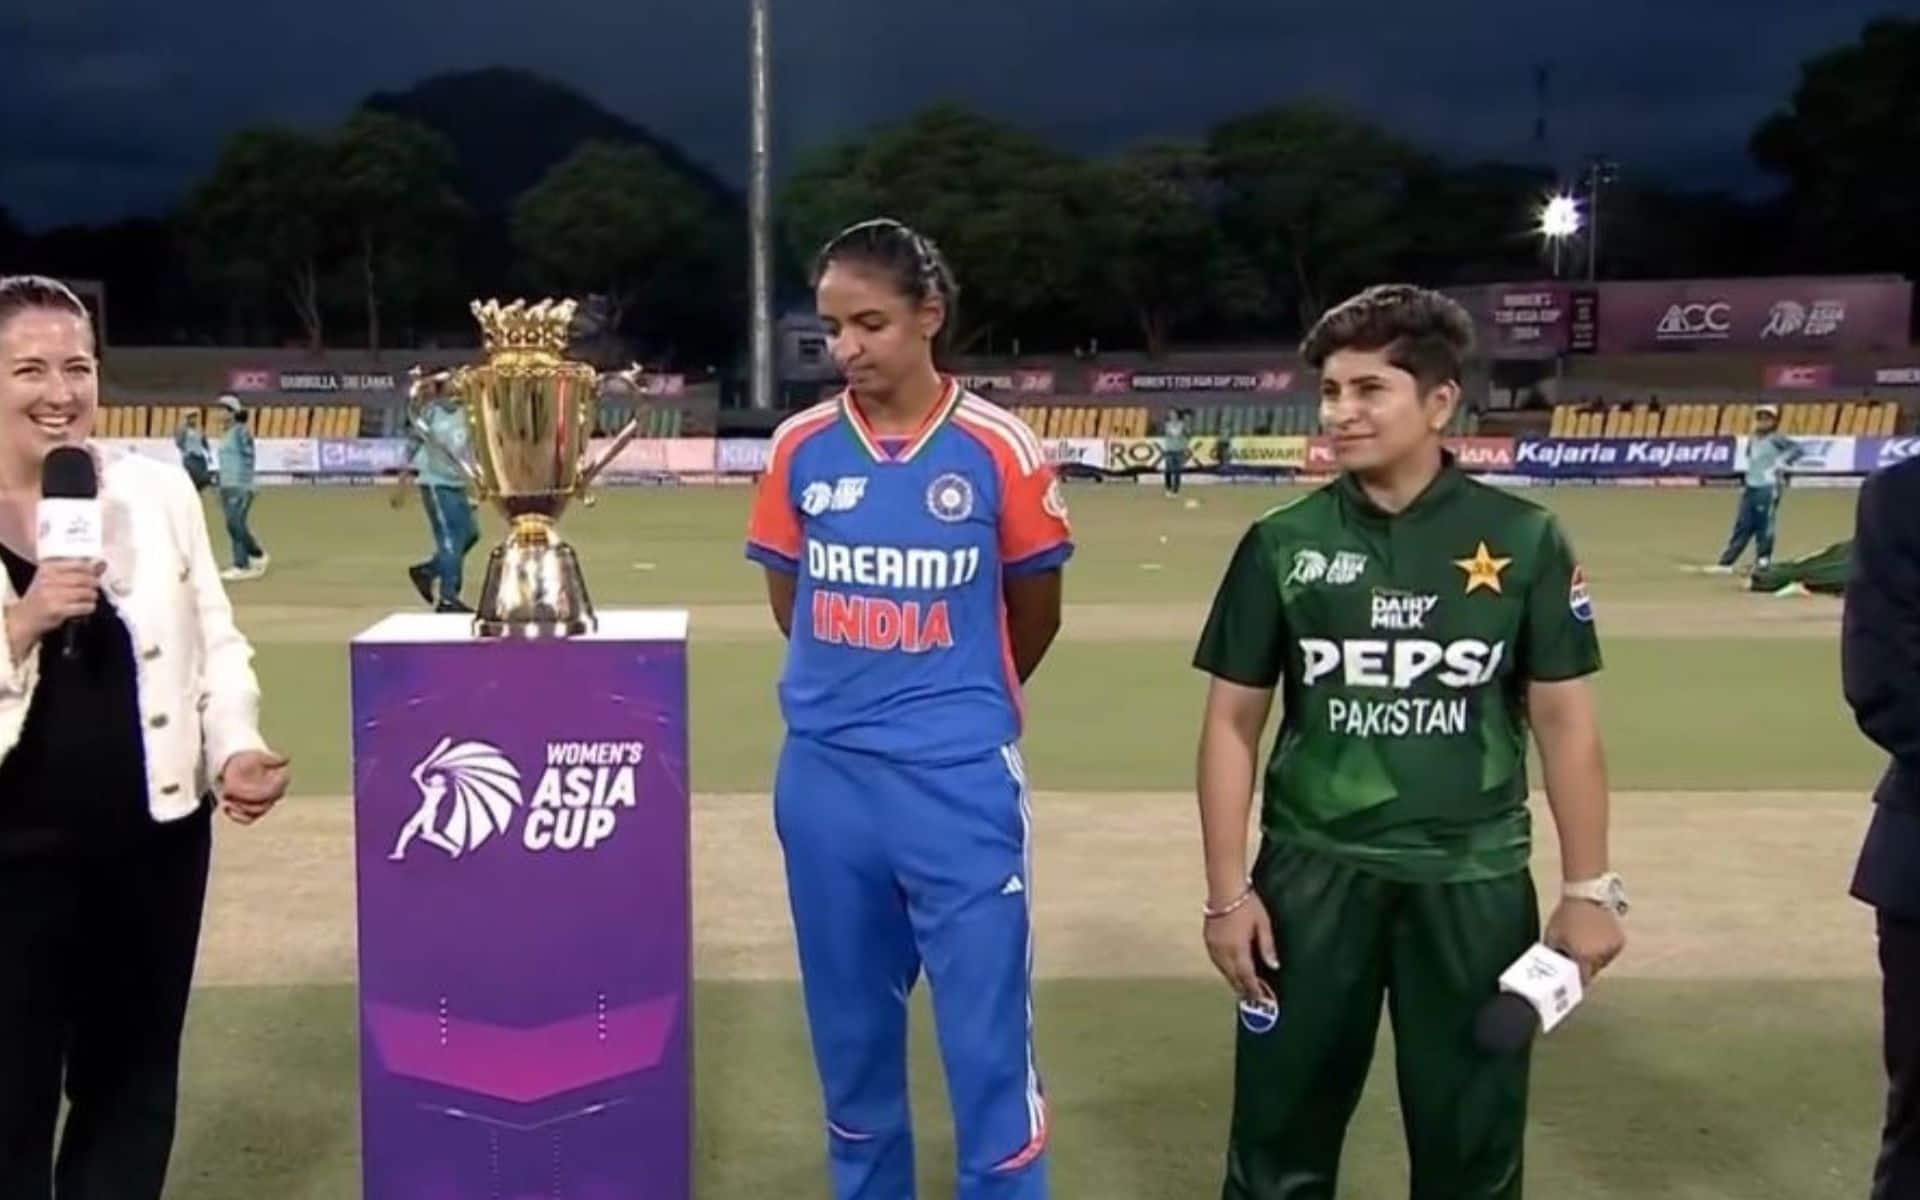 Women’s Asia Cup Results